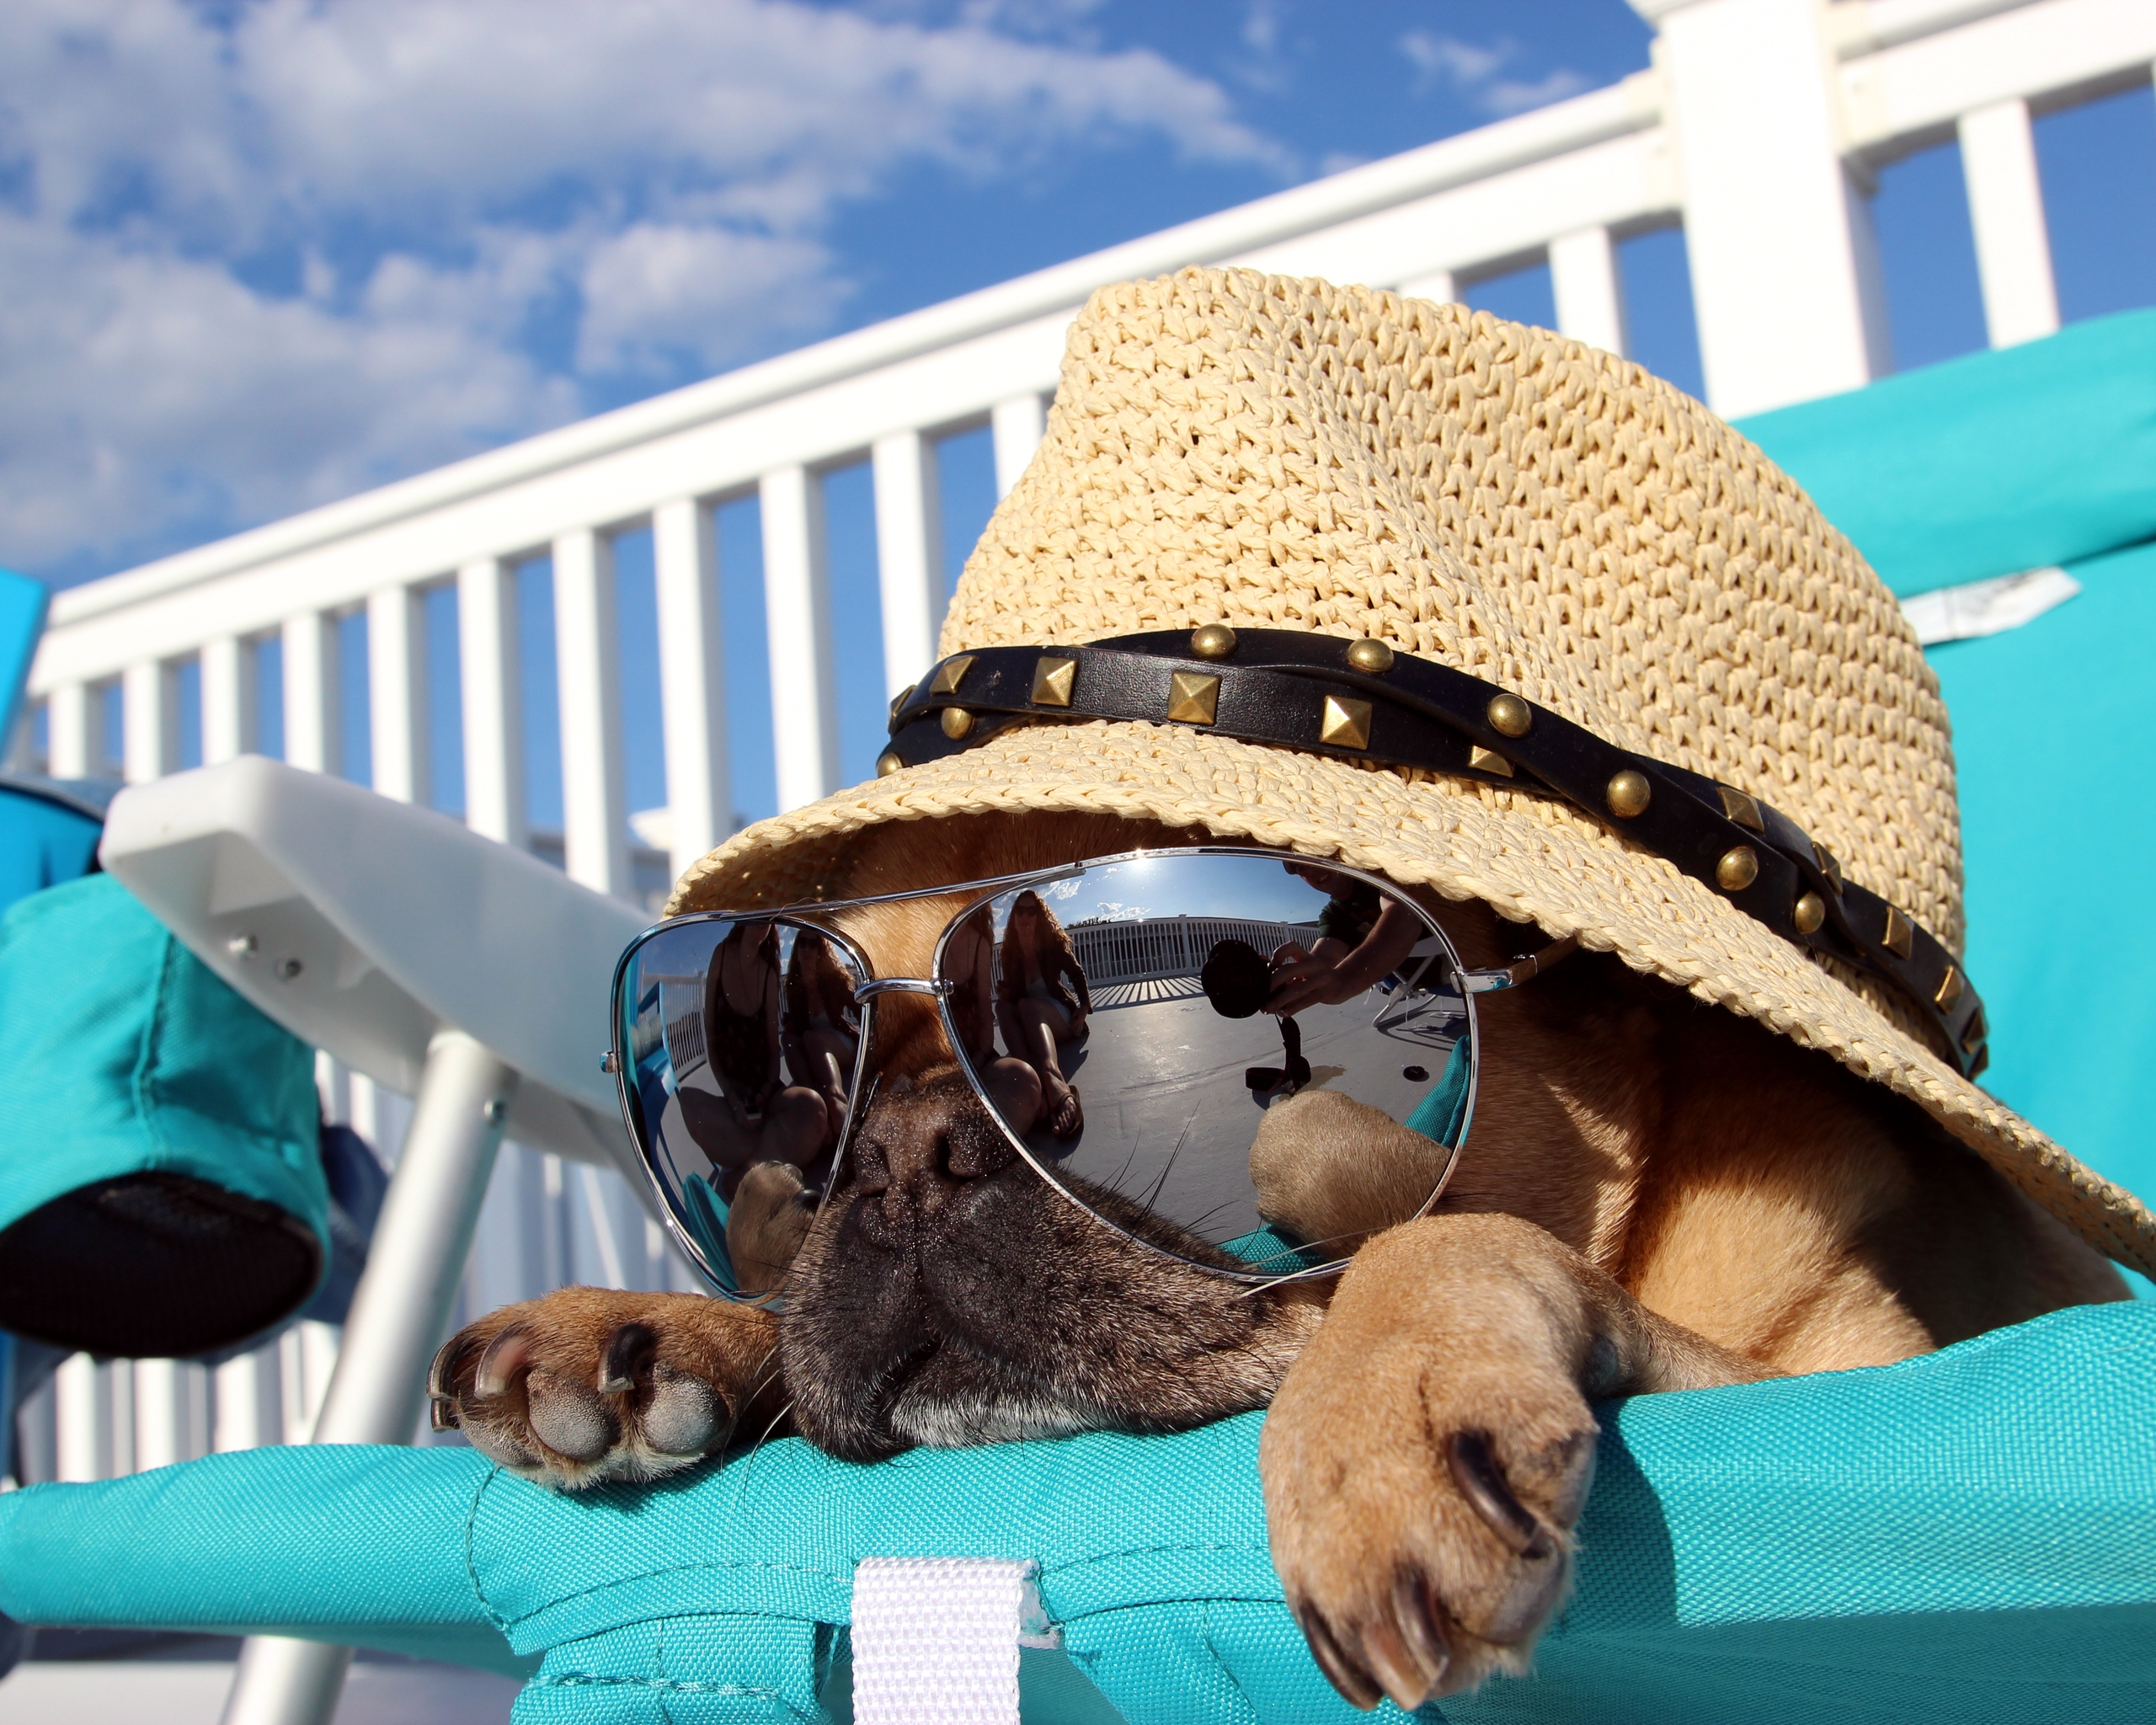 Image: Dog, hat, glasses, reflection, lies, sunbed, vacation, sky, clouds